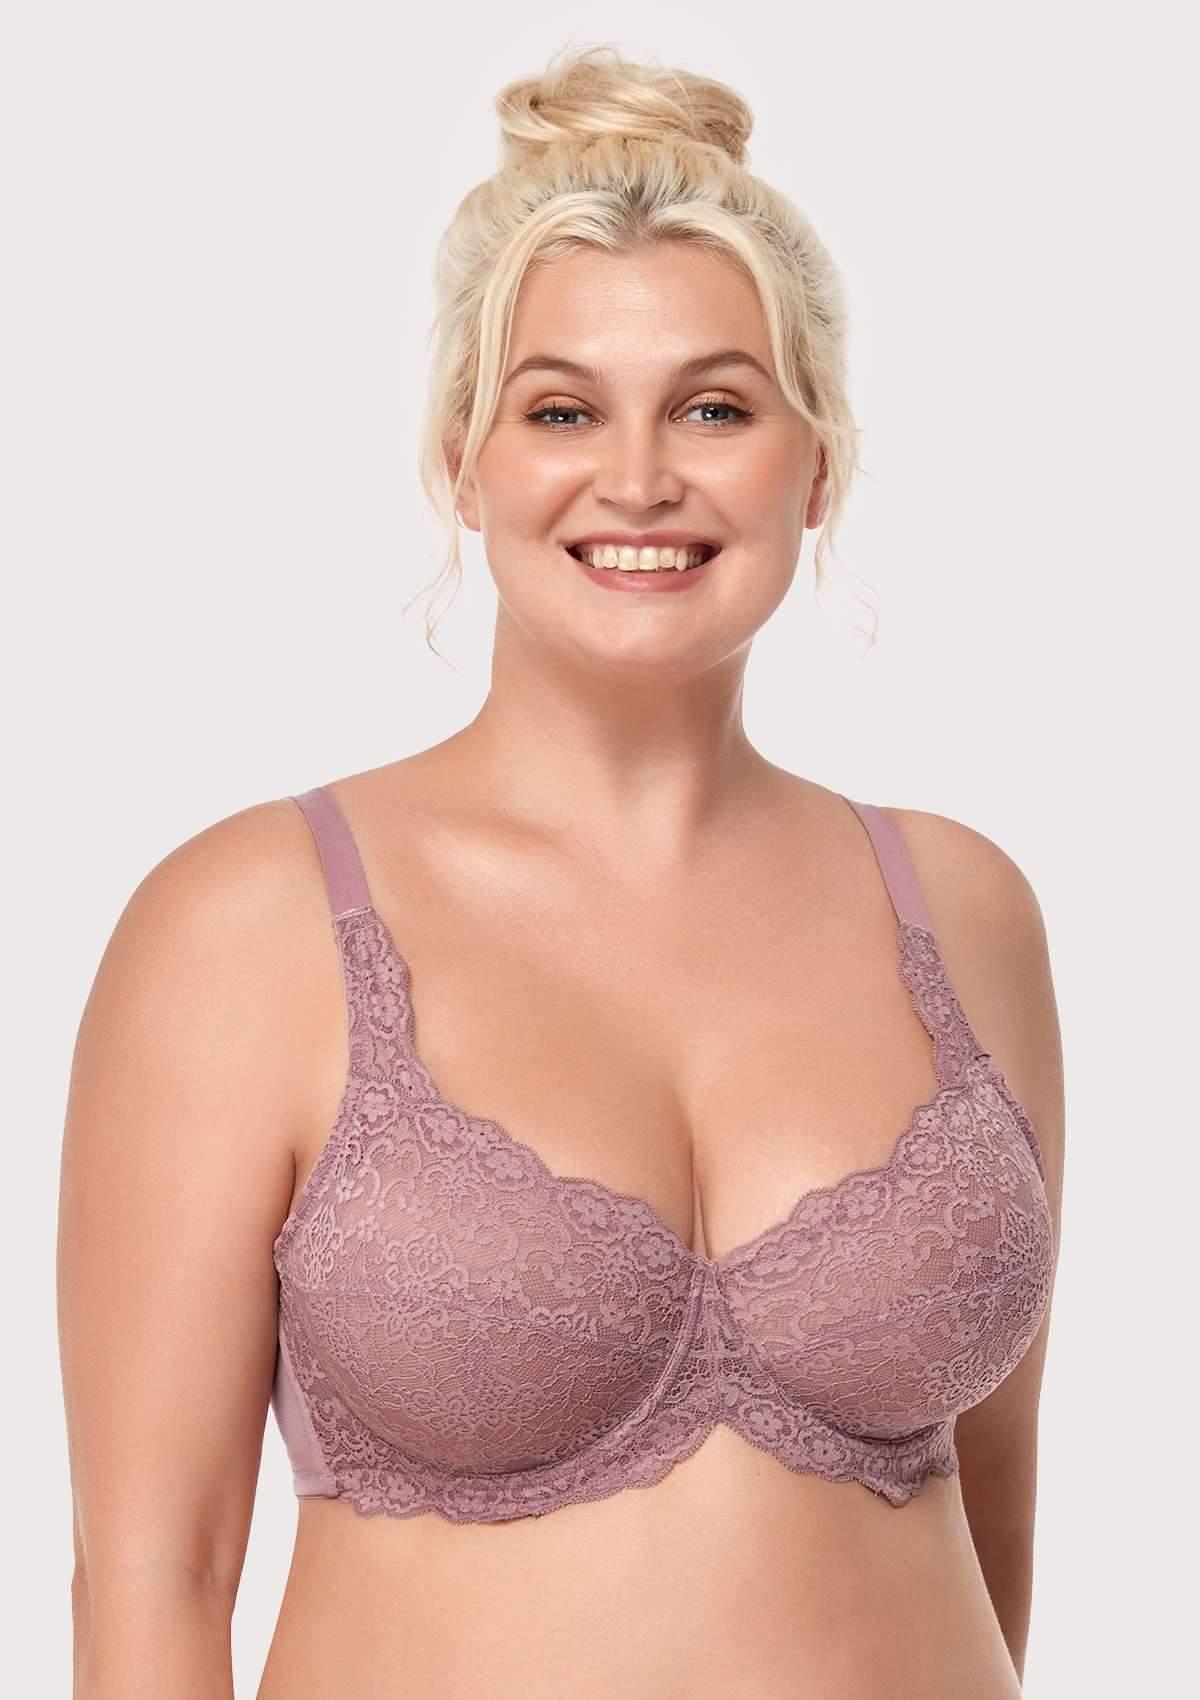 HSIA All-Over Floral Lace Unlined Bra: Minimizer Bra For Heavy Breasts - Purple / 40 / C